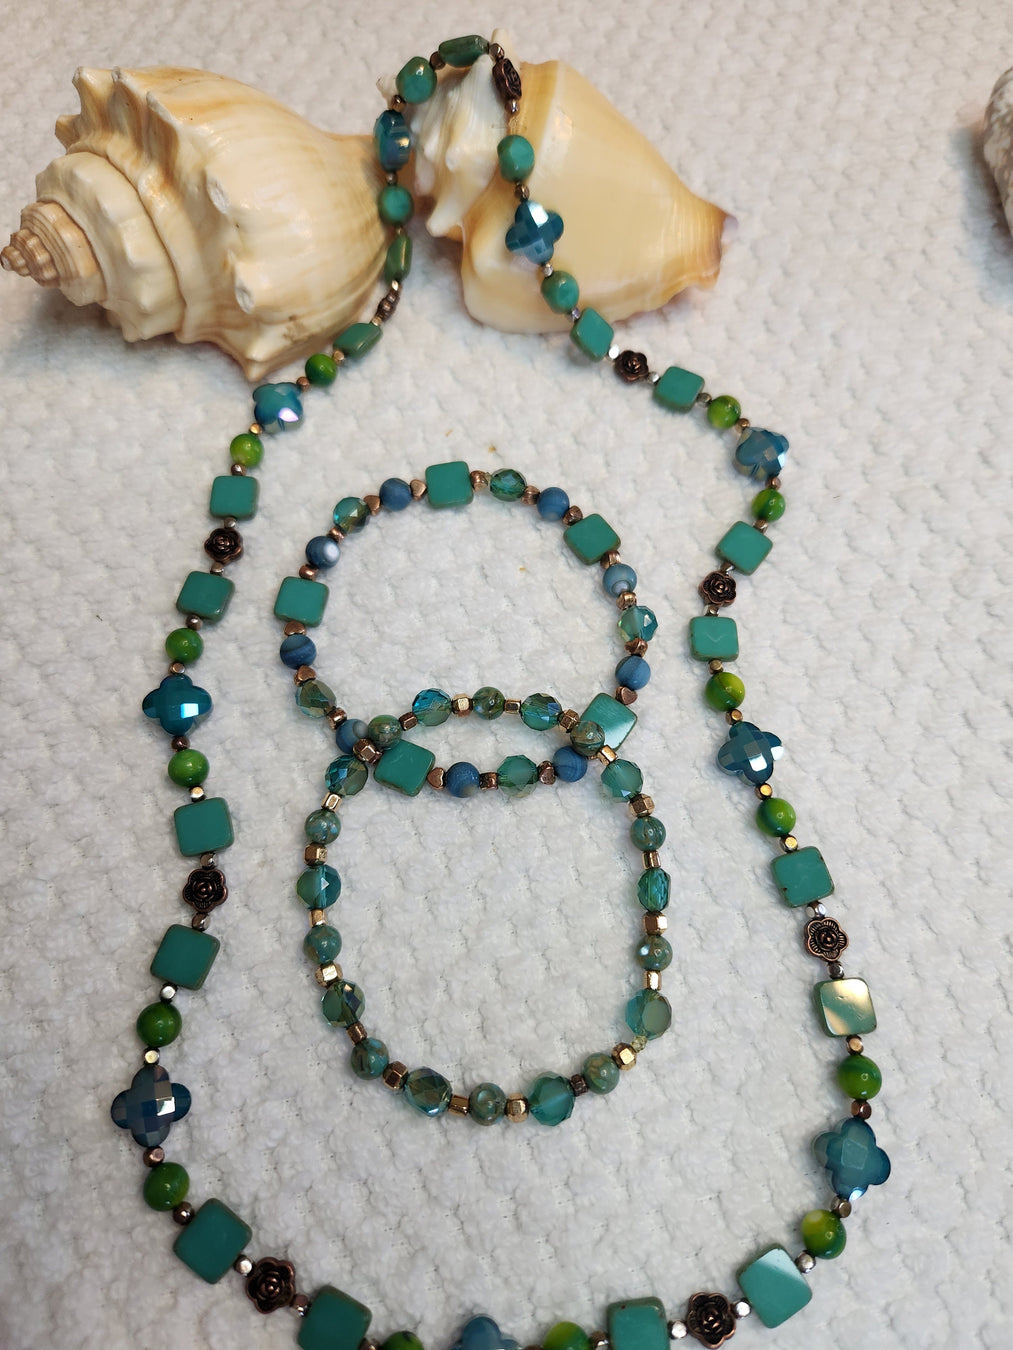 A Turquoise Colored Necklace and Bracelet Set